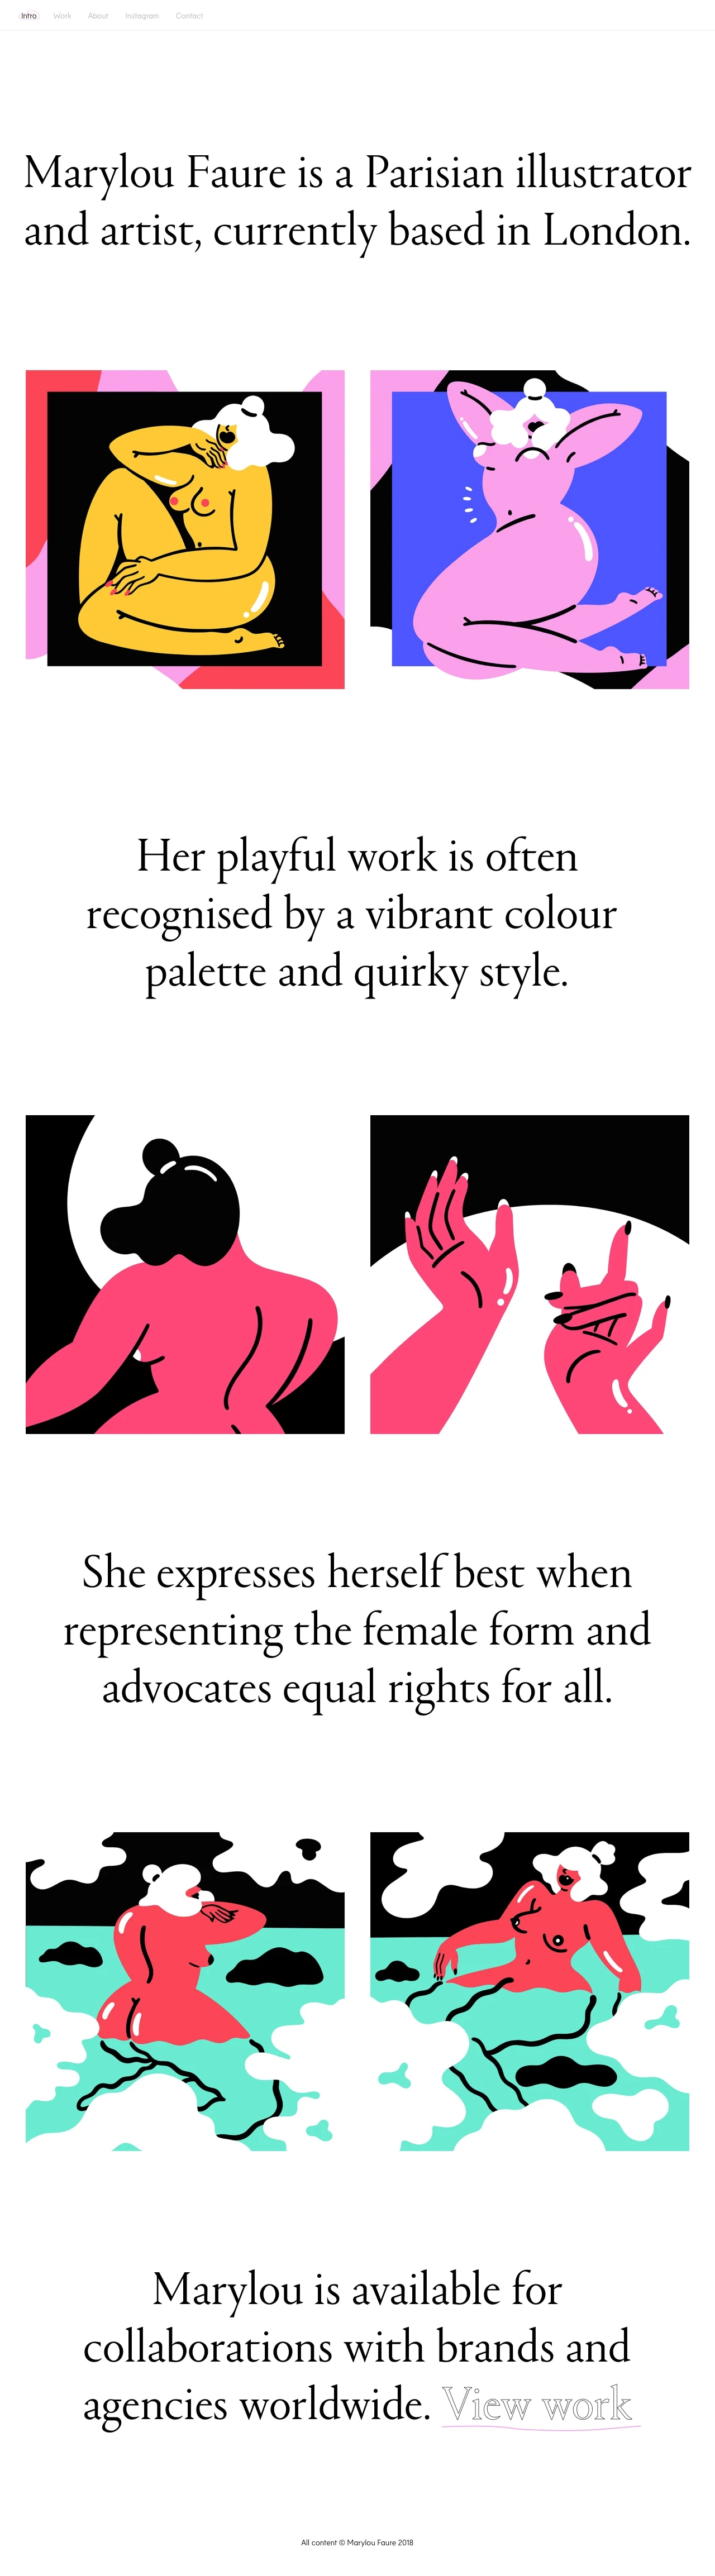 Marylou Faure Landing Page Example: Marylou Faure is a Parisian illustrator and artist, currently based in London. Her playful work is often recognised by a vibrant colour palette and quirky style. She expresses herself best when representing the female form and advocates equal rights for all.